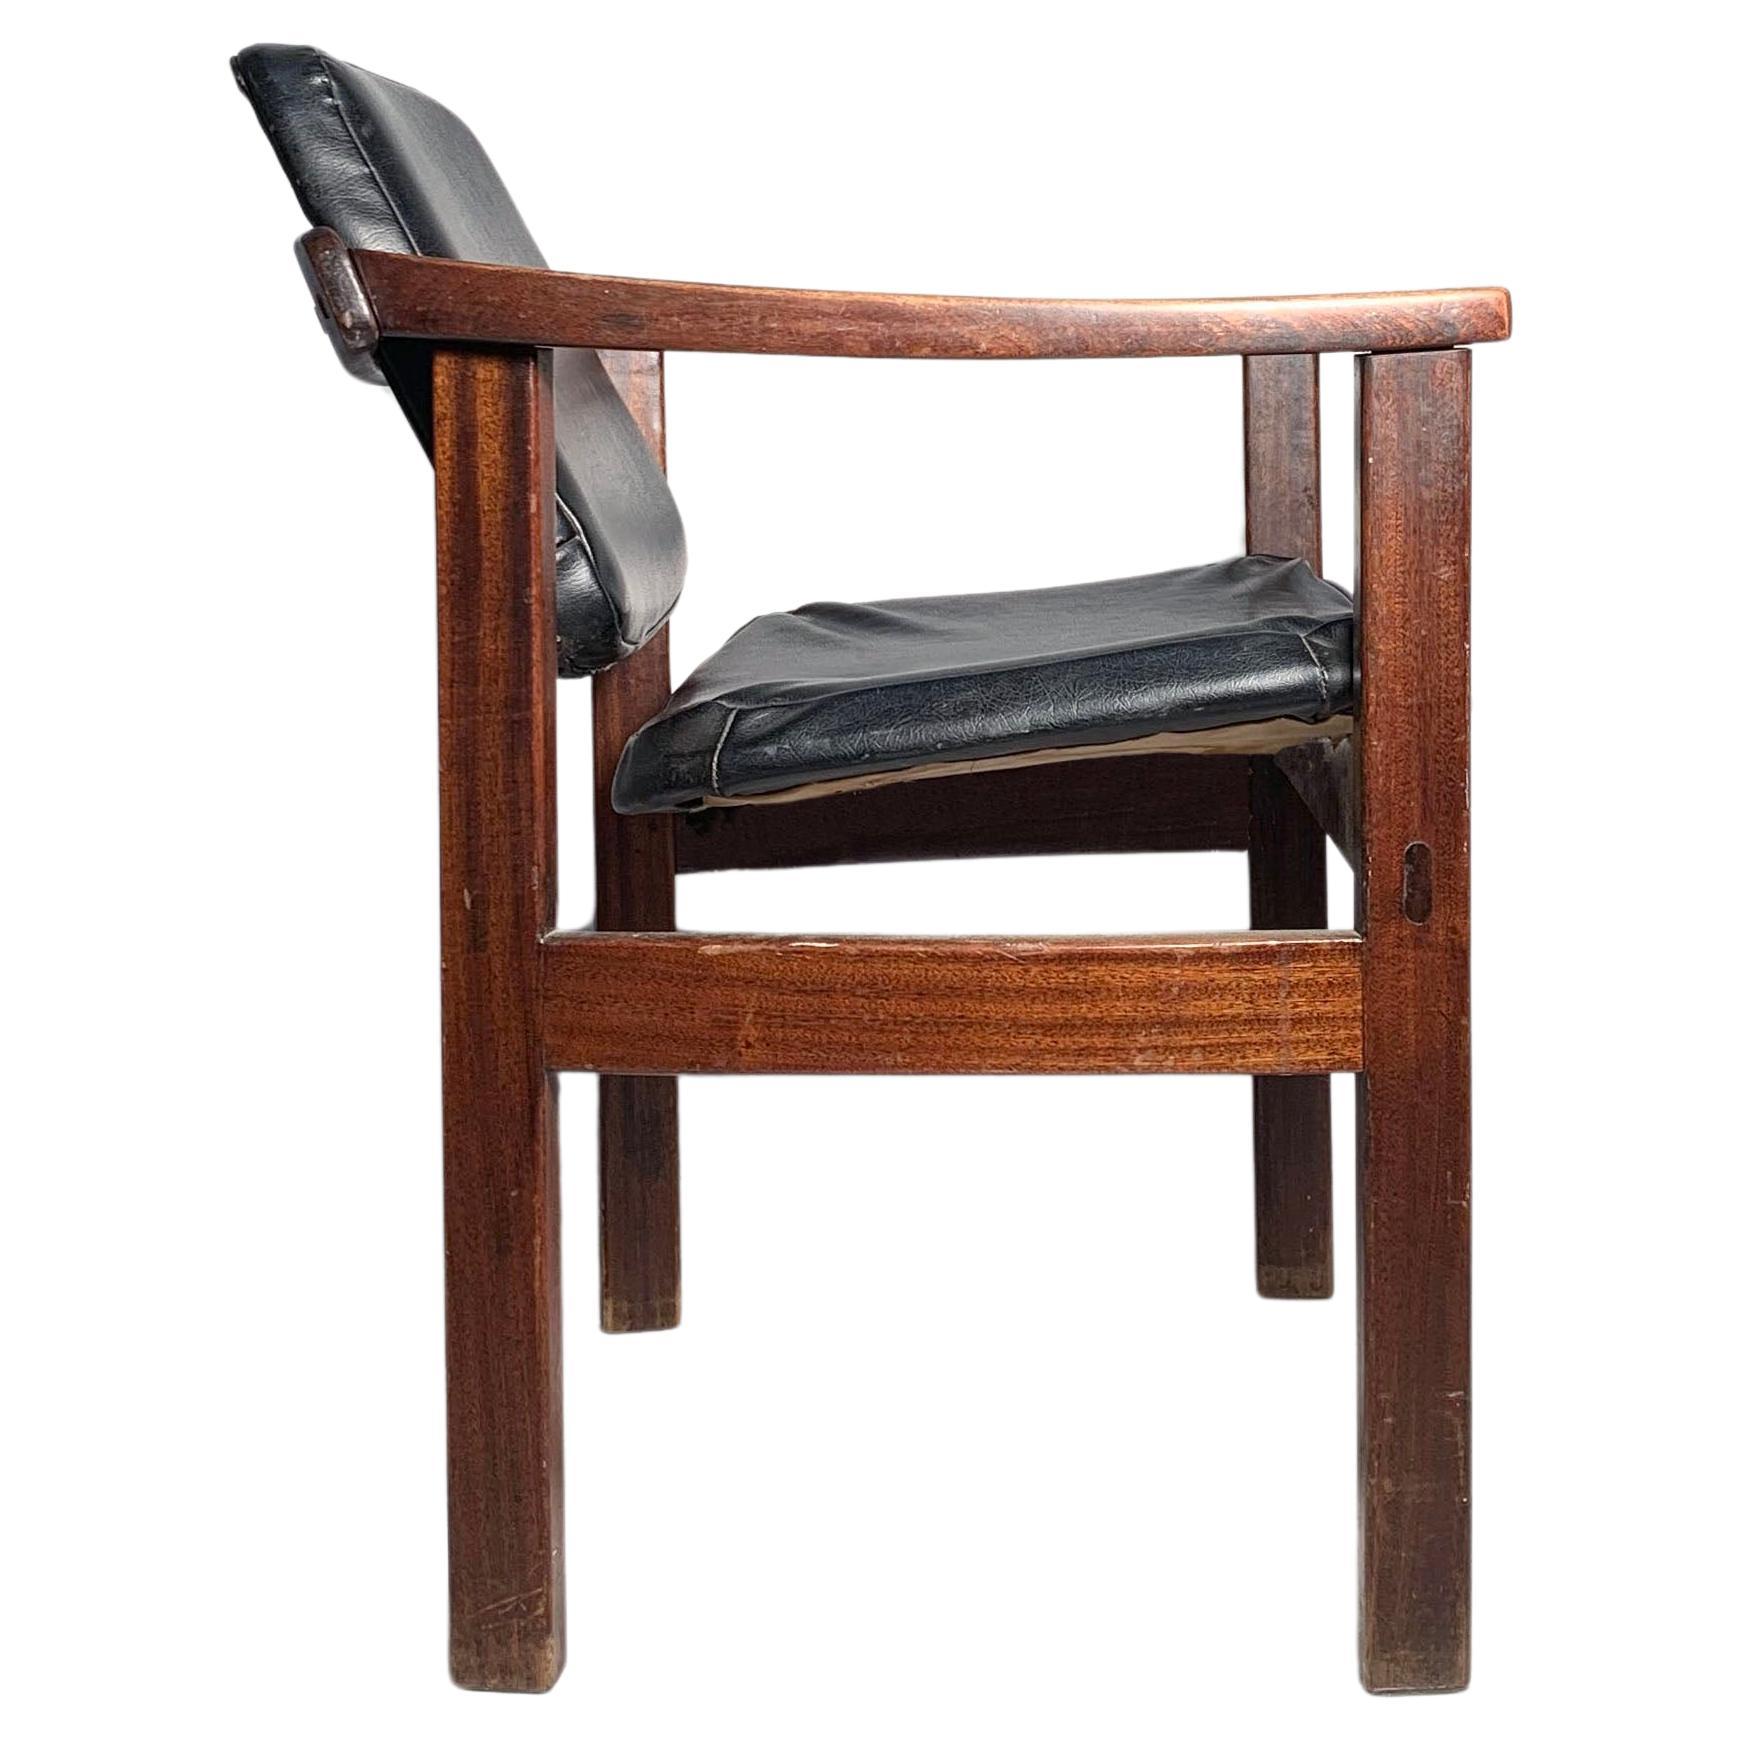 Vintage Modern South African Chair by John Tabraham for Kallenbach